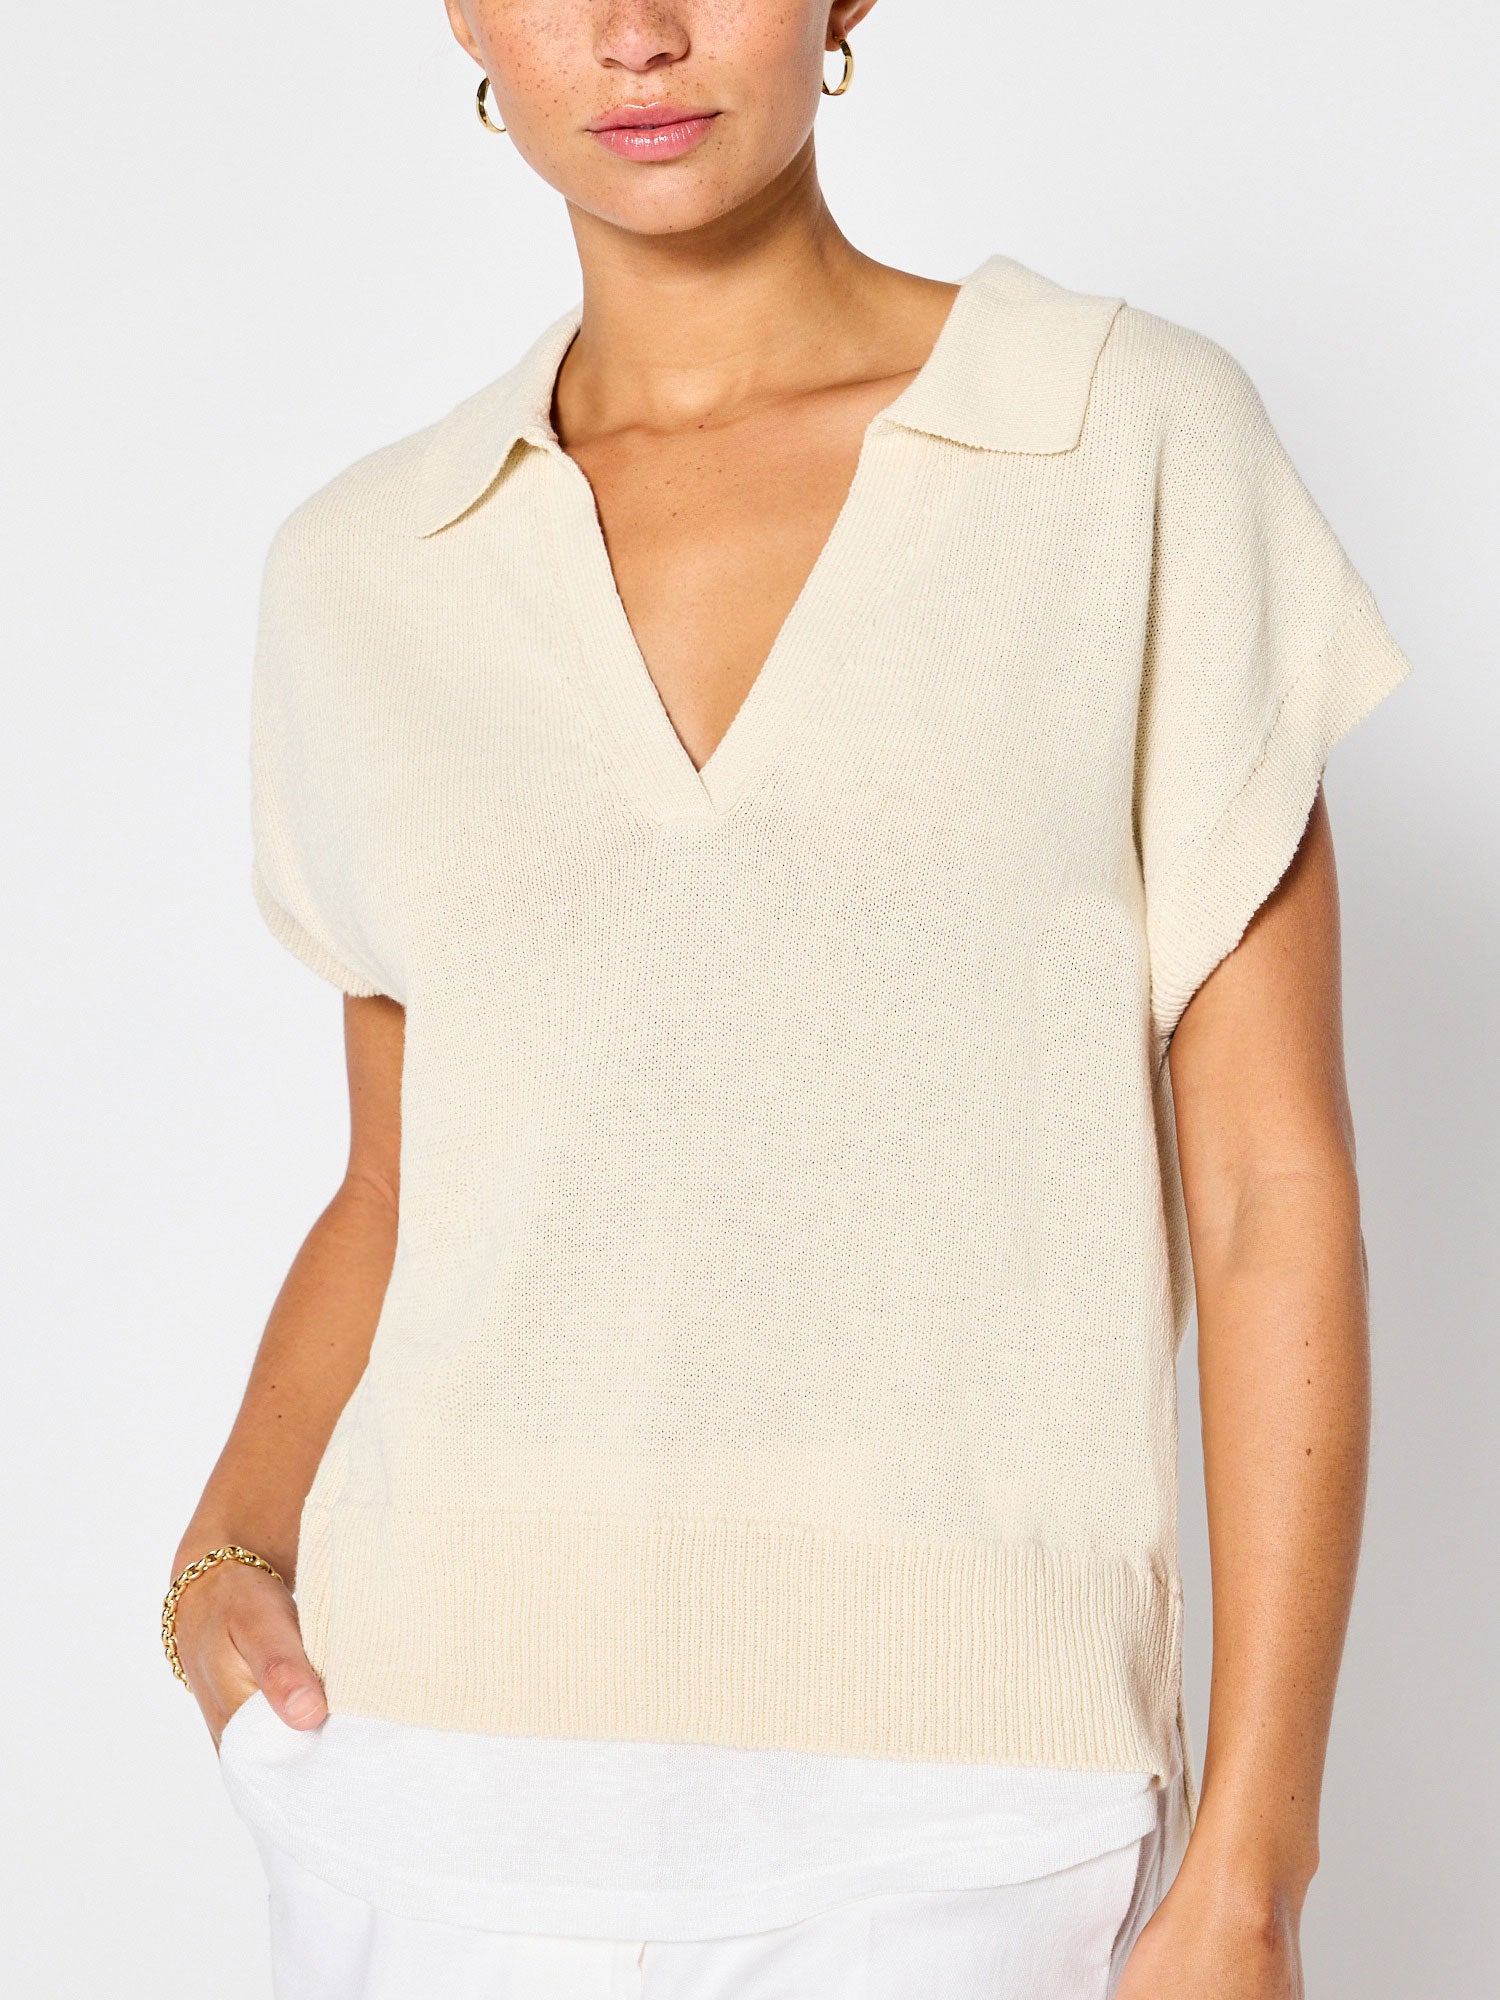 Jaia layered polo shortsleeve sweater front view